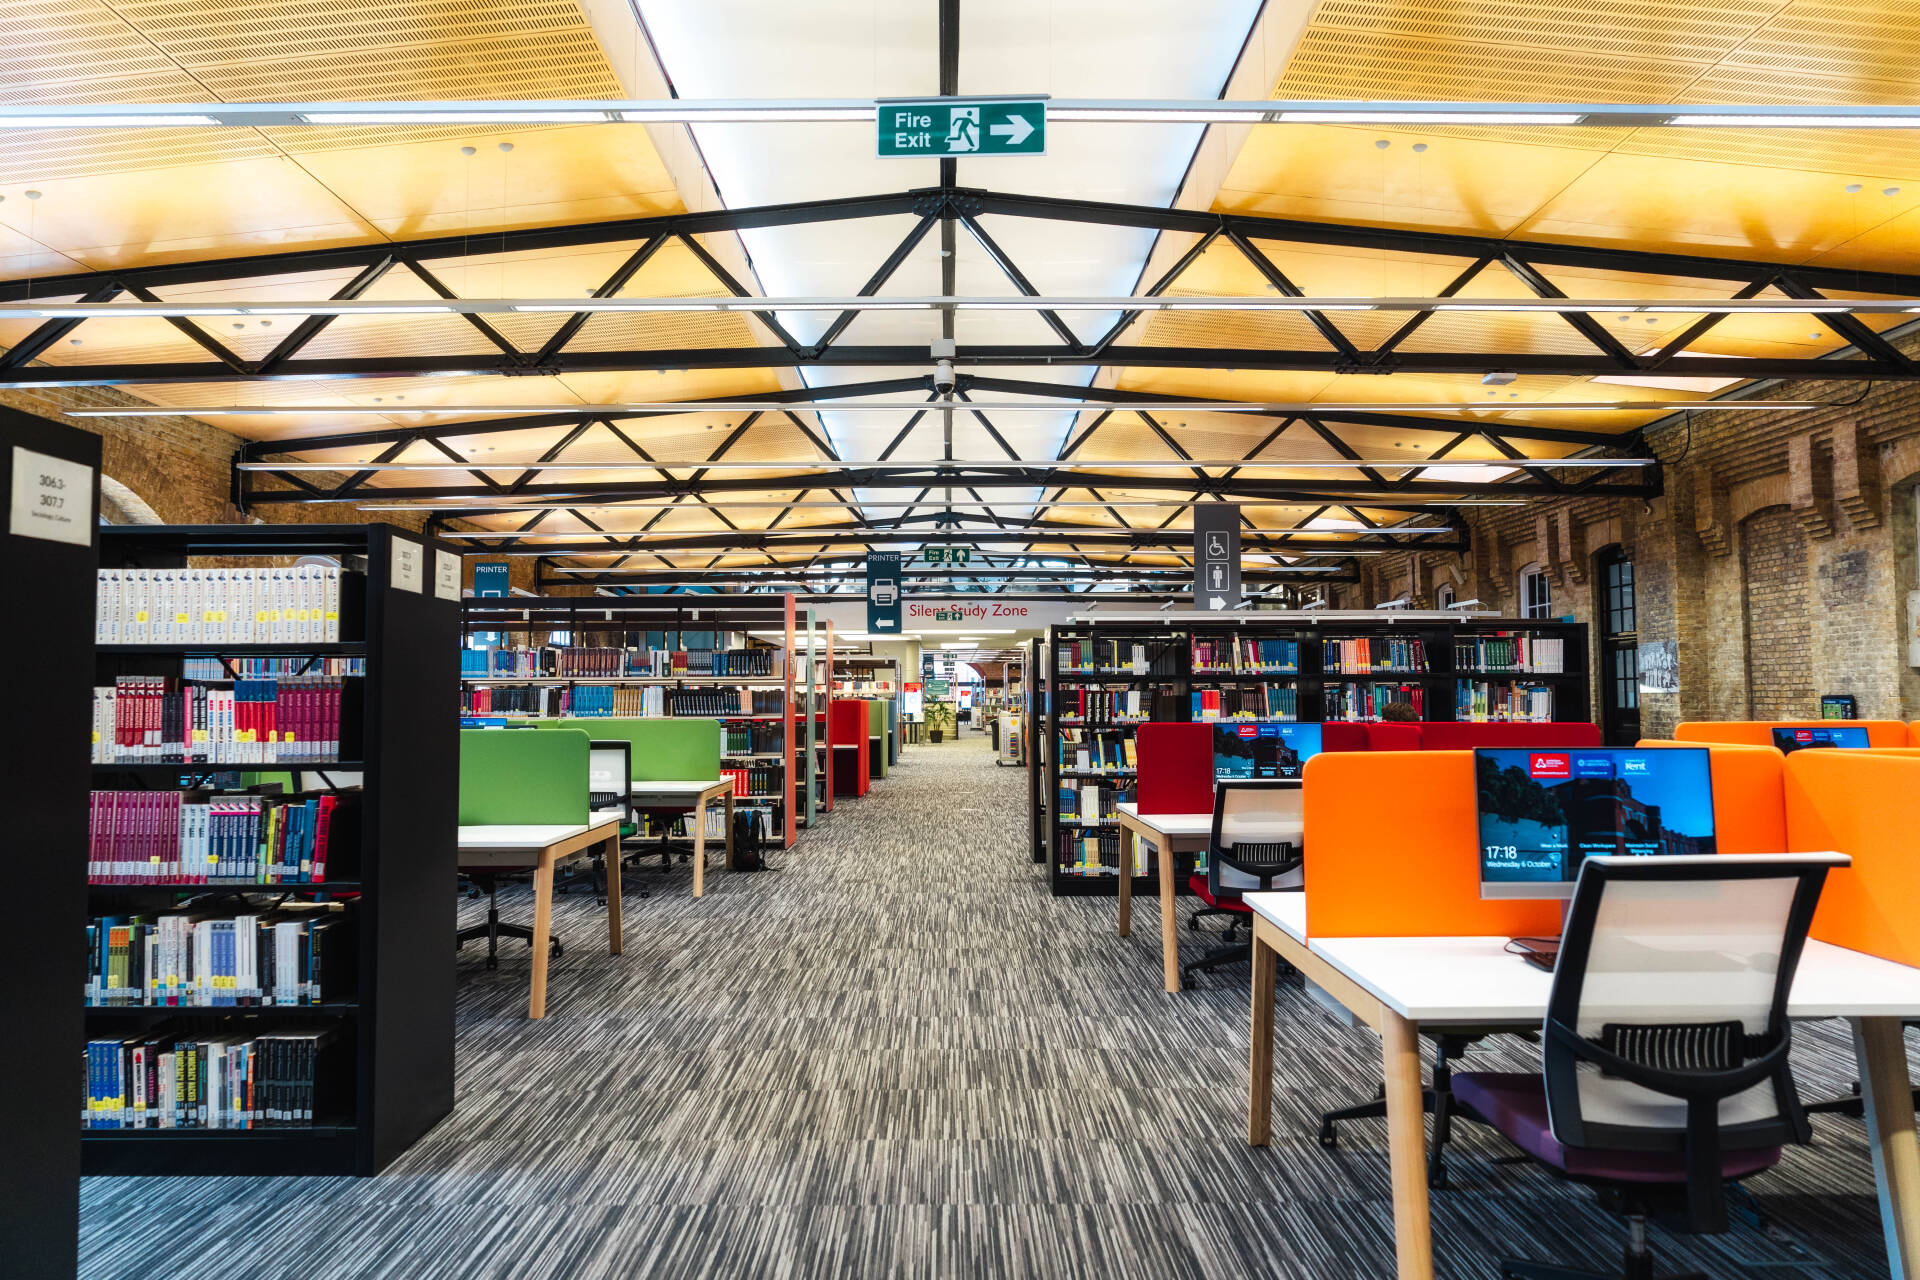 Inside Drill Hall Library